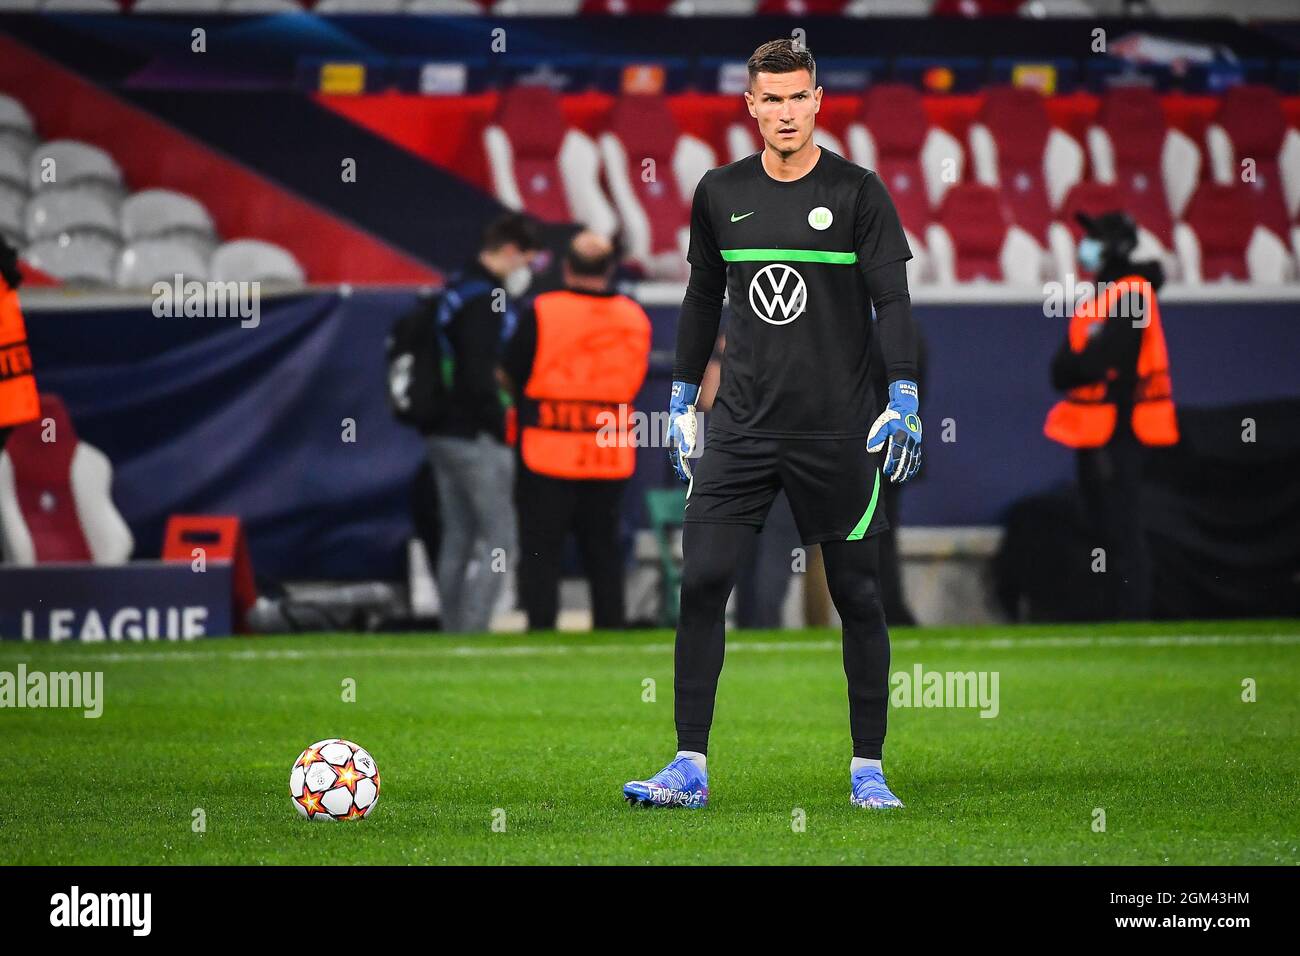 Pavao PERVAN of Wolfsburg during the UEFA Champions League, Group Stage,  Group G football match between Lille OSC (LOSC) and Verein fur  Leibesubungen Wolfsburg on September 14, 2021 at Pierre Mauroy Stadium